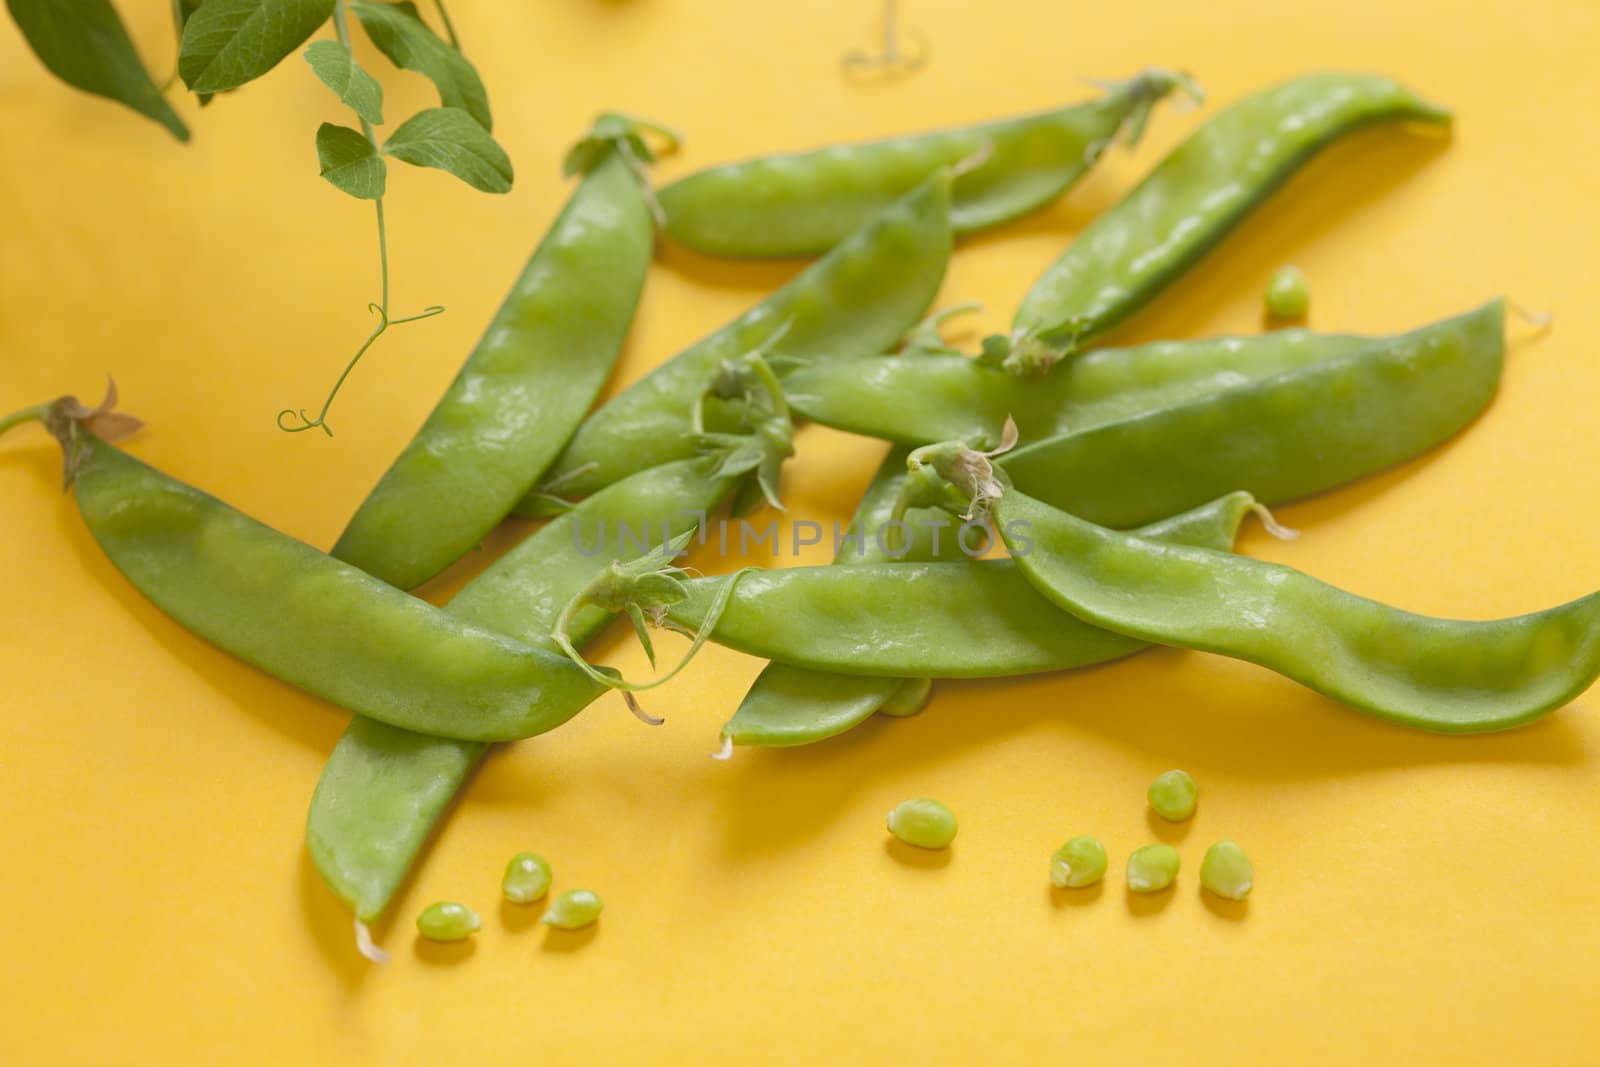 Freshly harvested snow peas on a yellow background